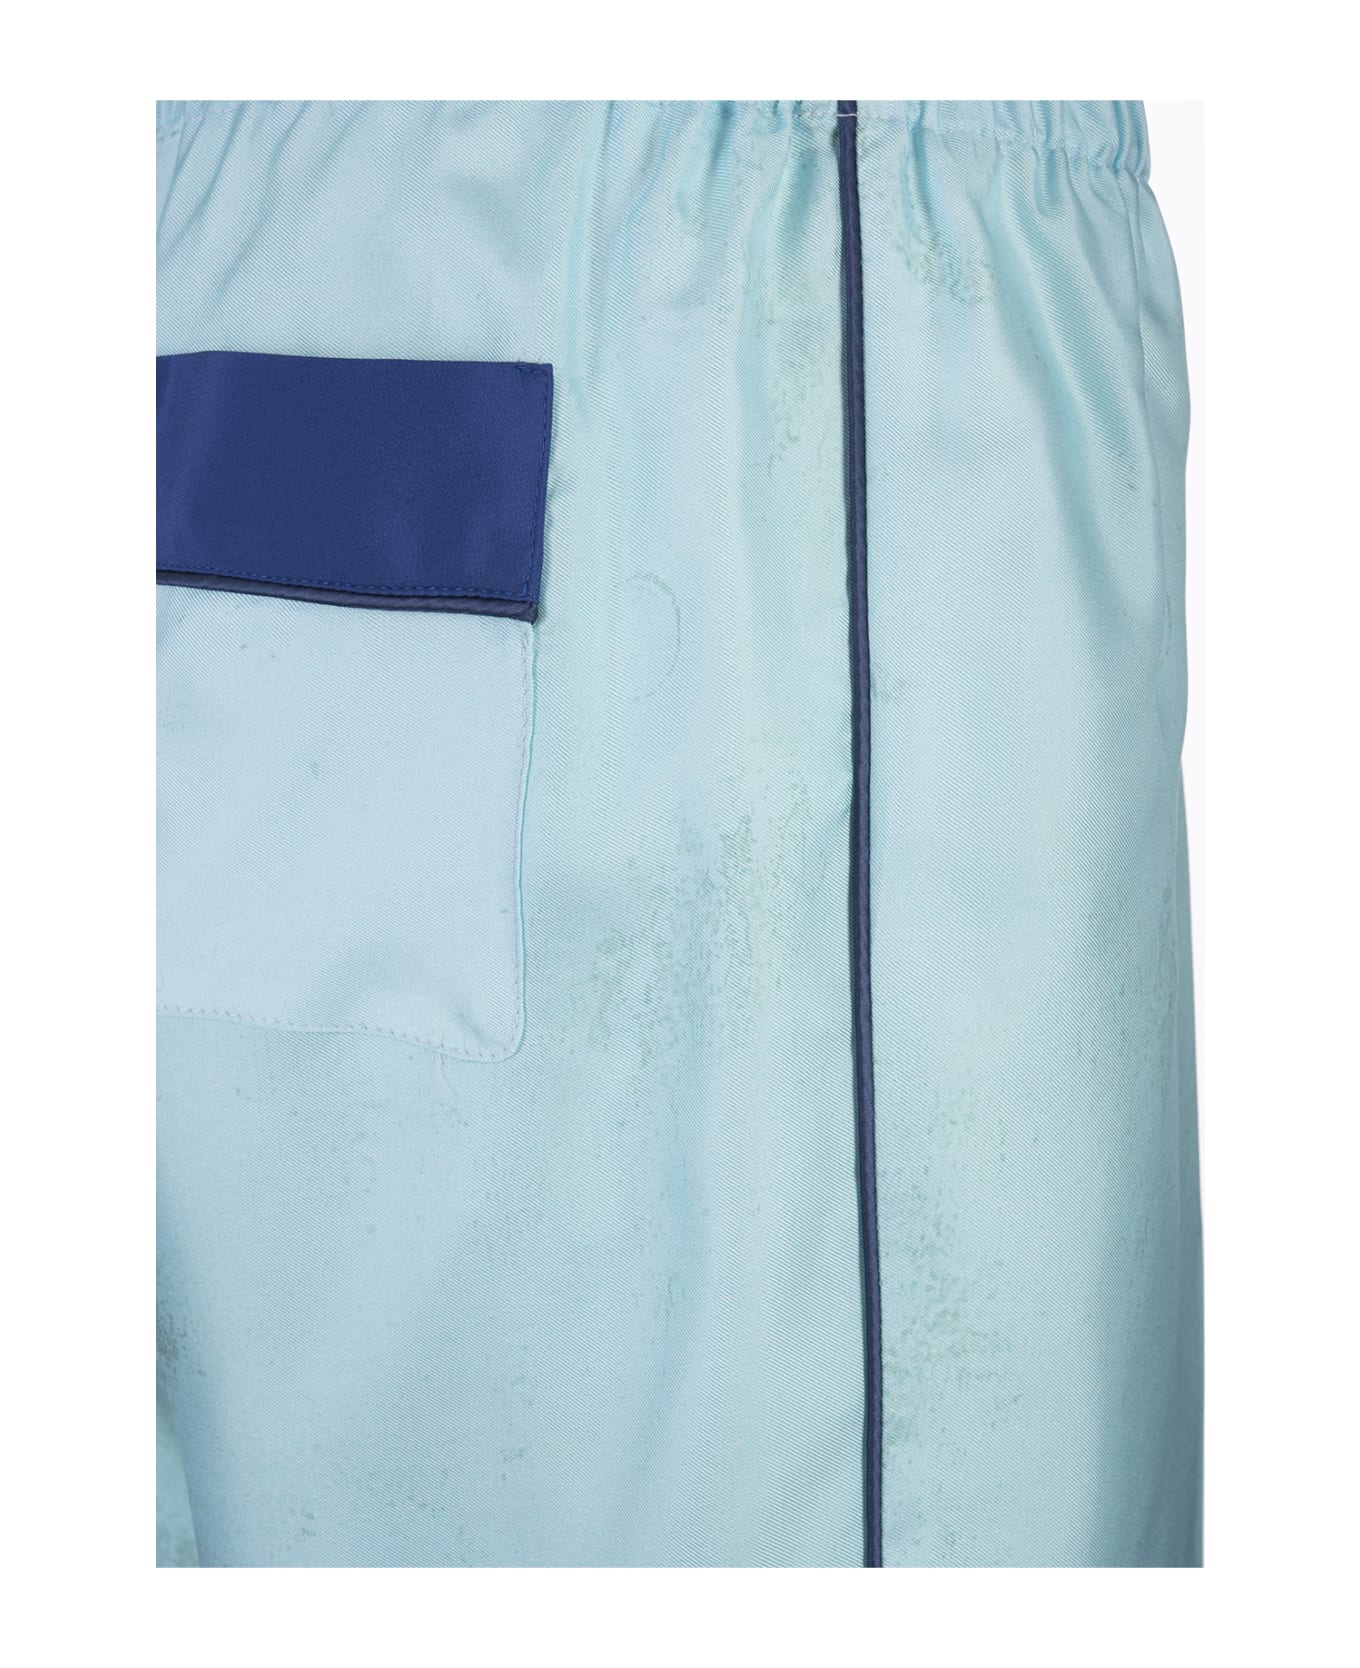 For Restless Sleepers Palms Blue Etere Trousers - Blue ボトムス